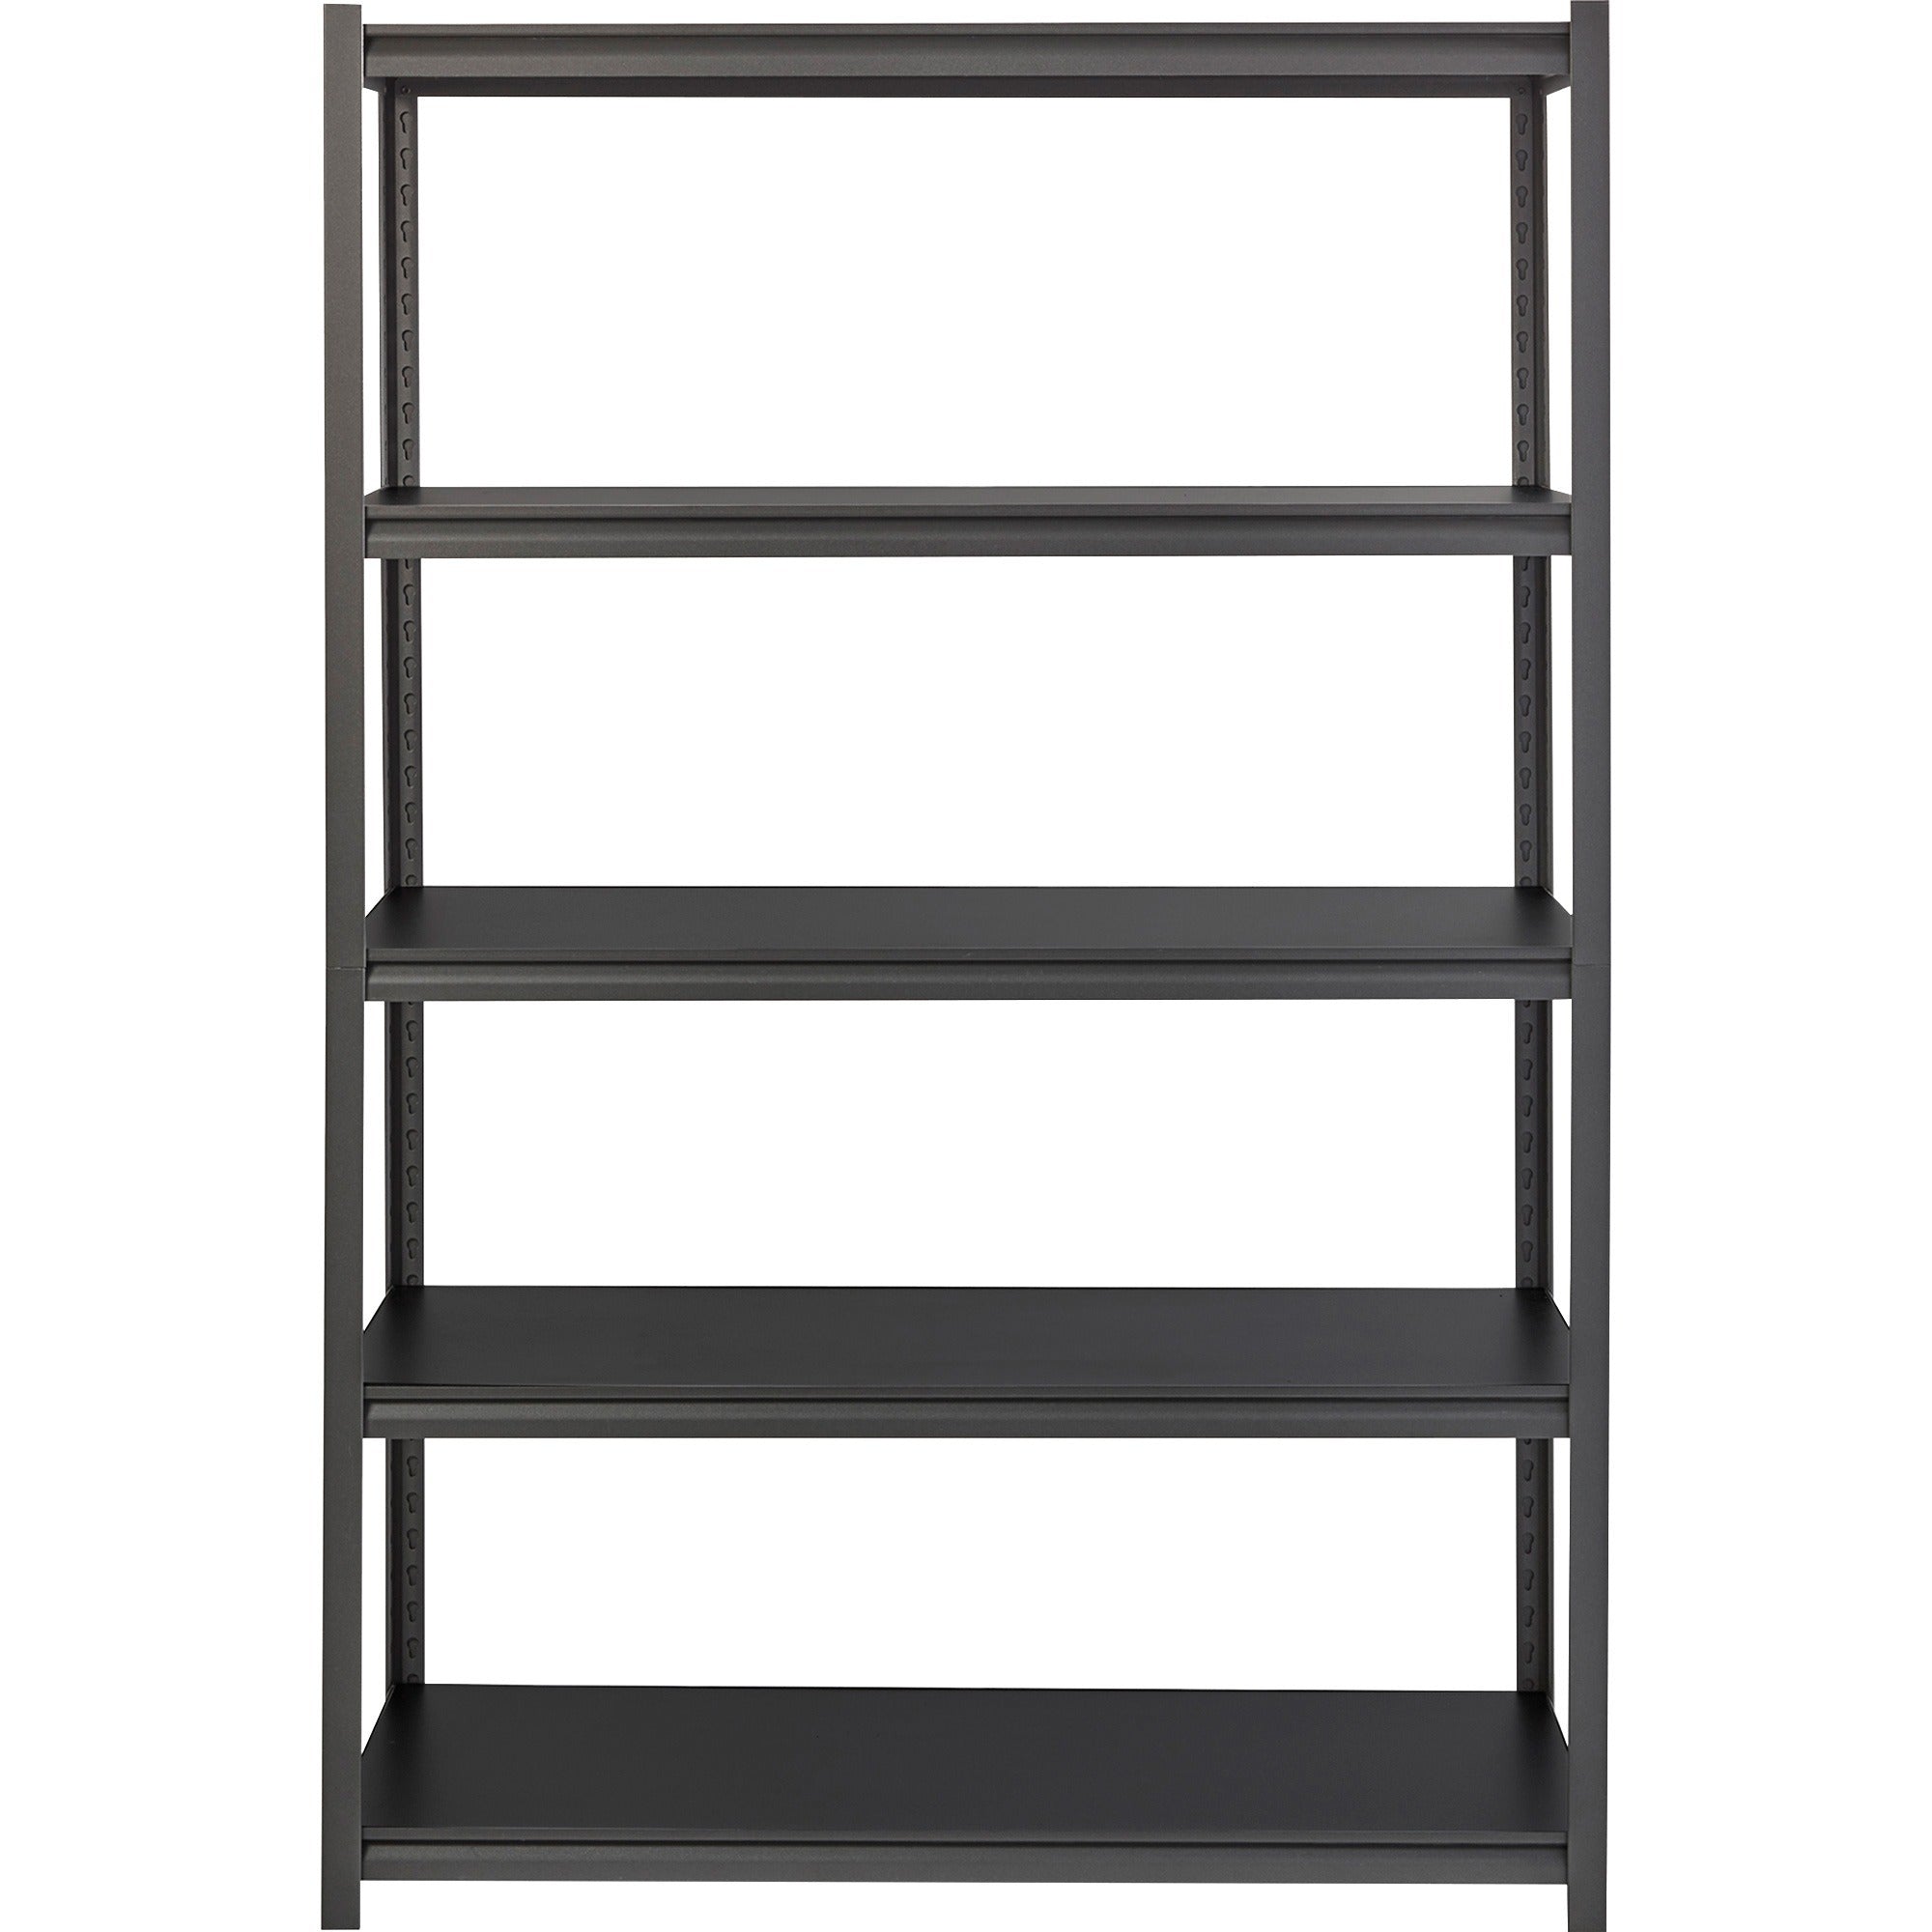 Lorell Iron Horse 3200 lb Capacity Riveted Shelving - 5 Shelf(ves) - 72" Height x 48" Width x 24" Depth - 30% Recycled - Black - Steel, Laminate - 1 Each - 2